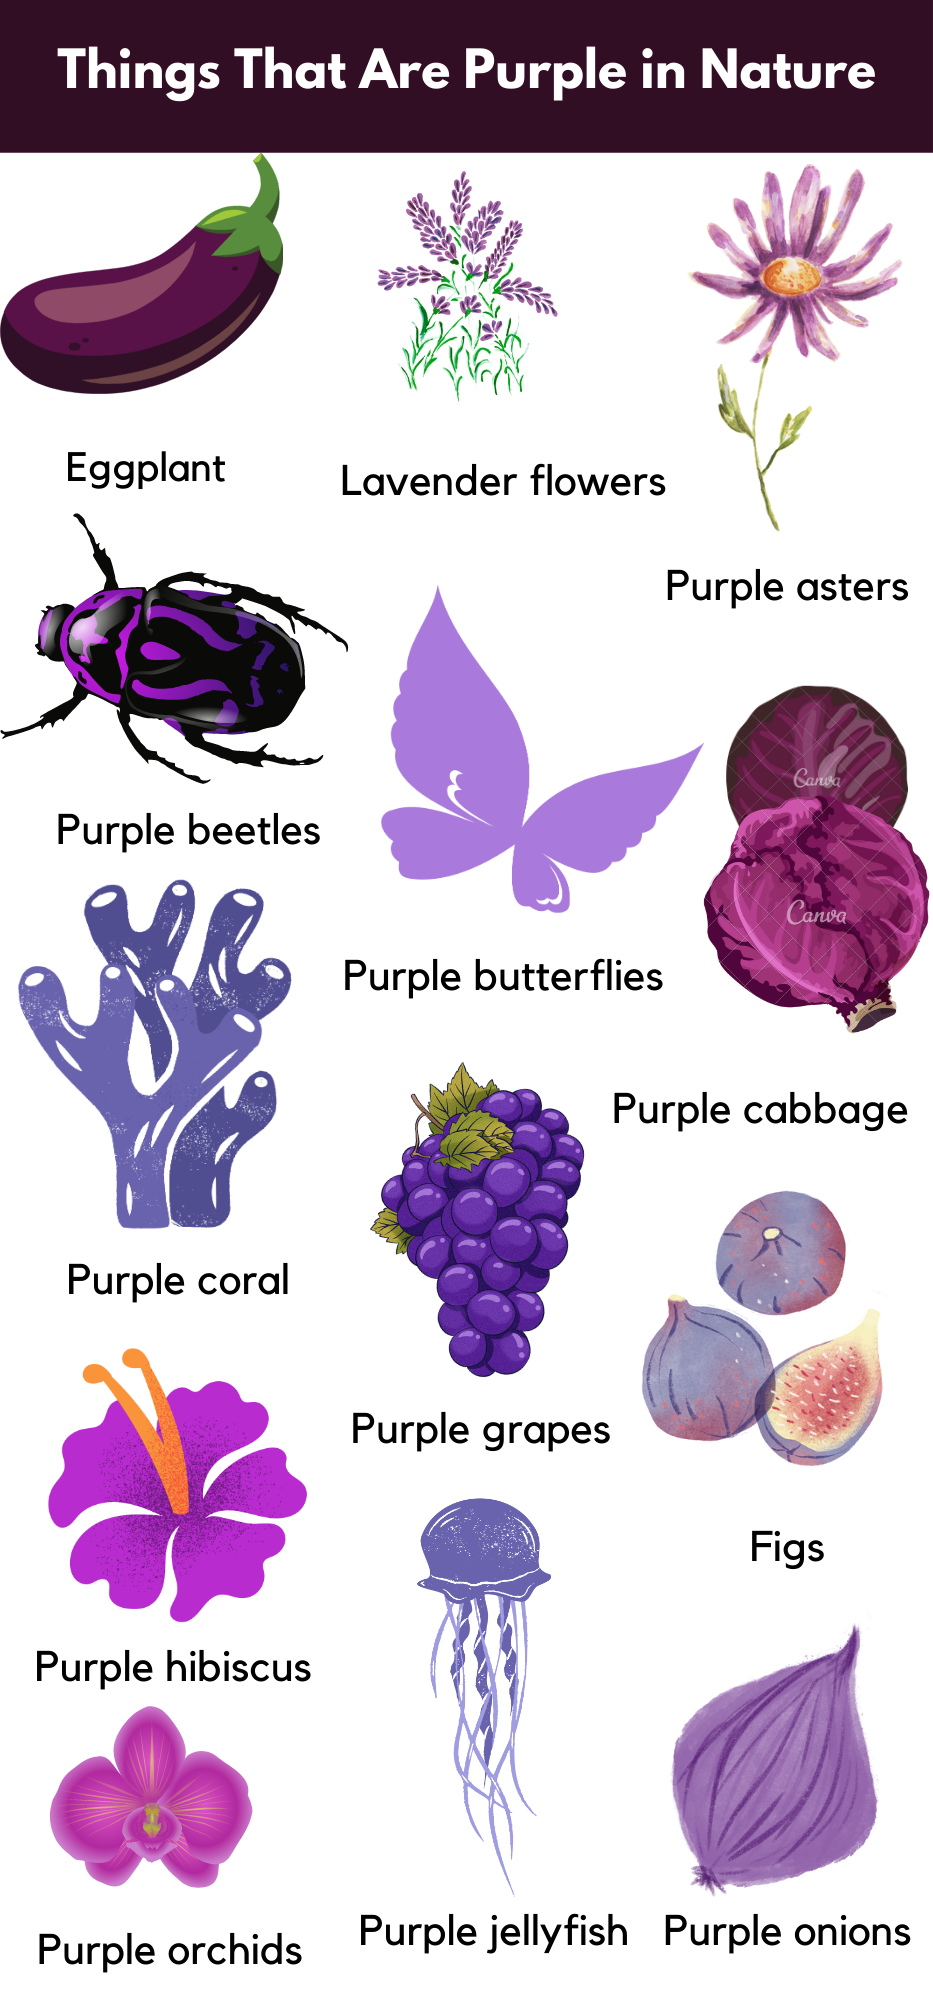 Things That Are Purple in Nature